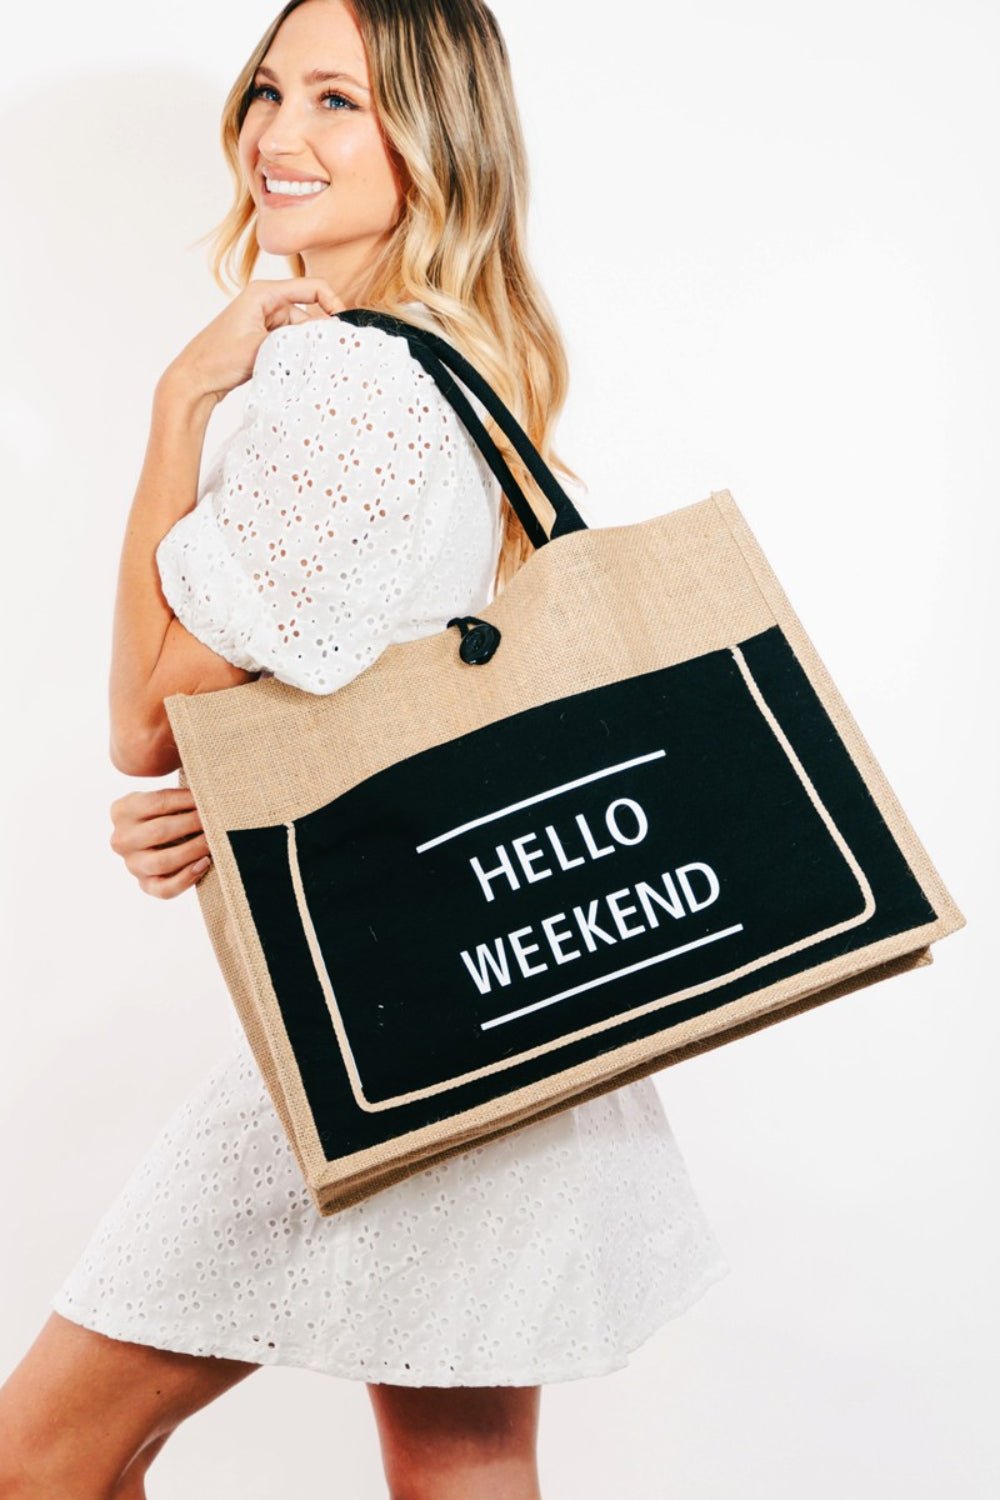 Fame Hello Weekend Burlap Tote Bag - Fashion Girl Online Store